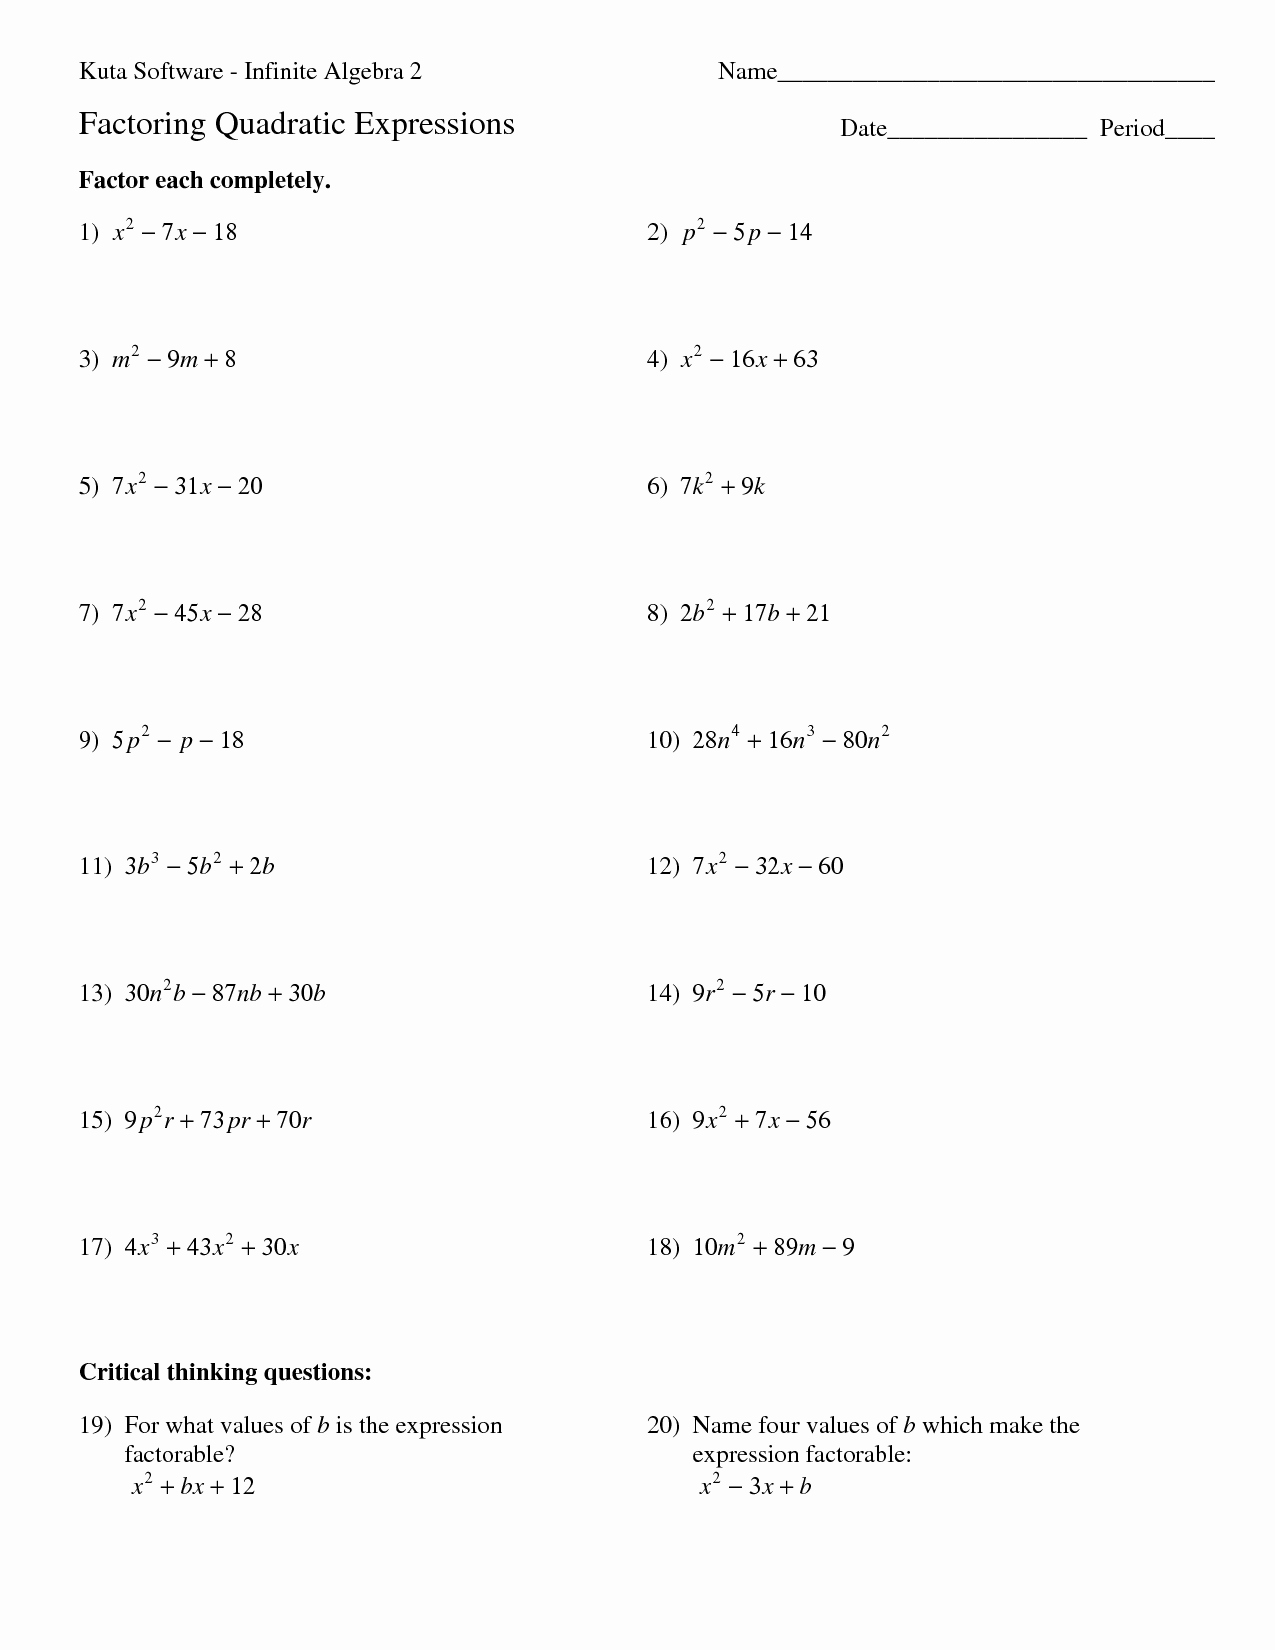 Factoring Quadratic Expressions Worksheet Answers Lovely 14 Best Of Kuta software Factoring Trinomials